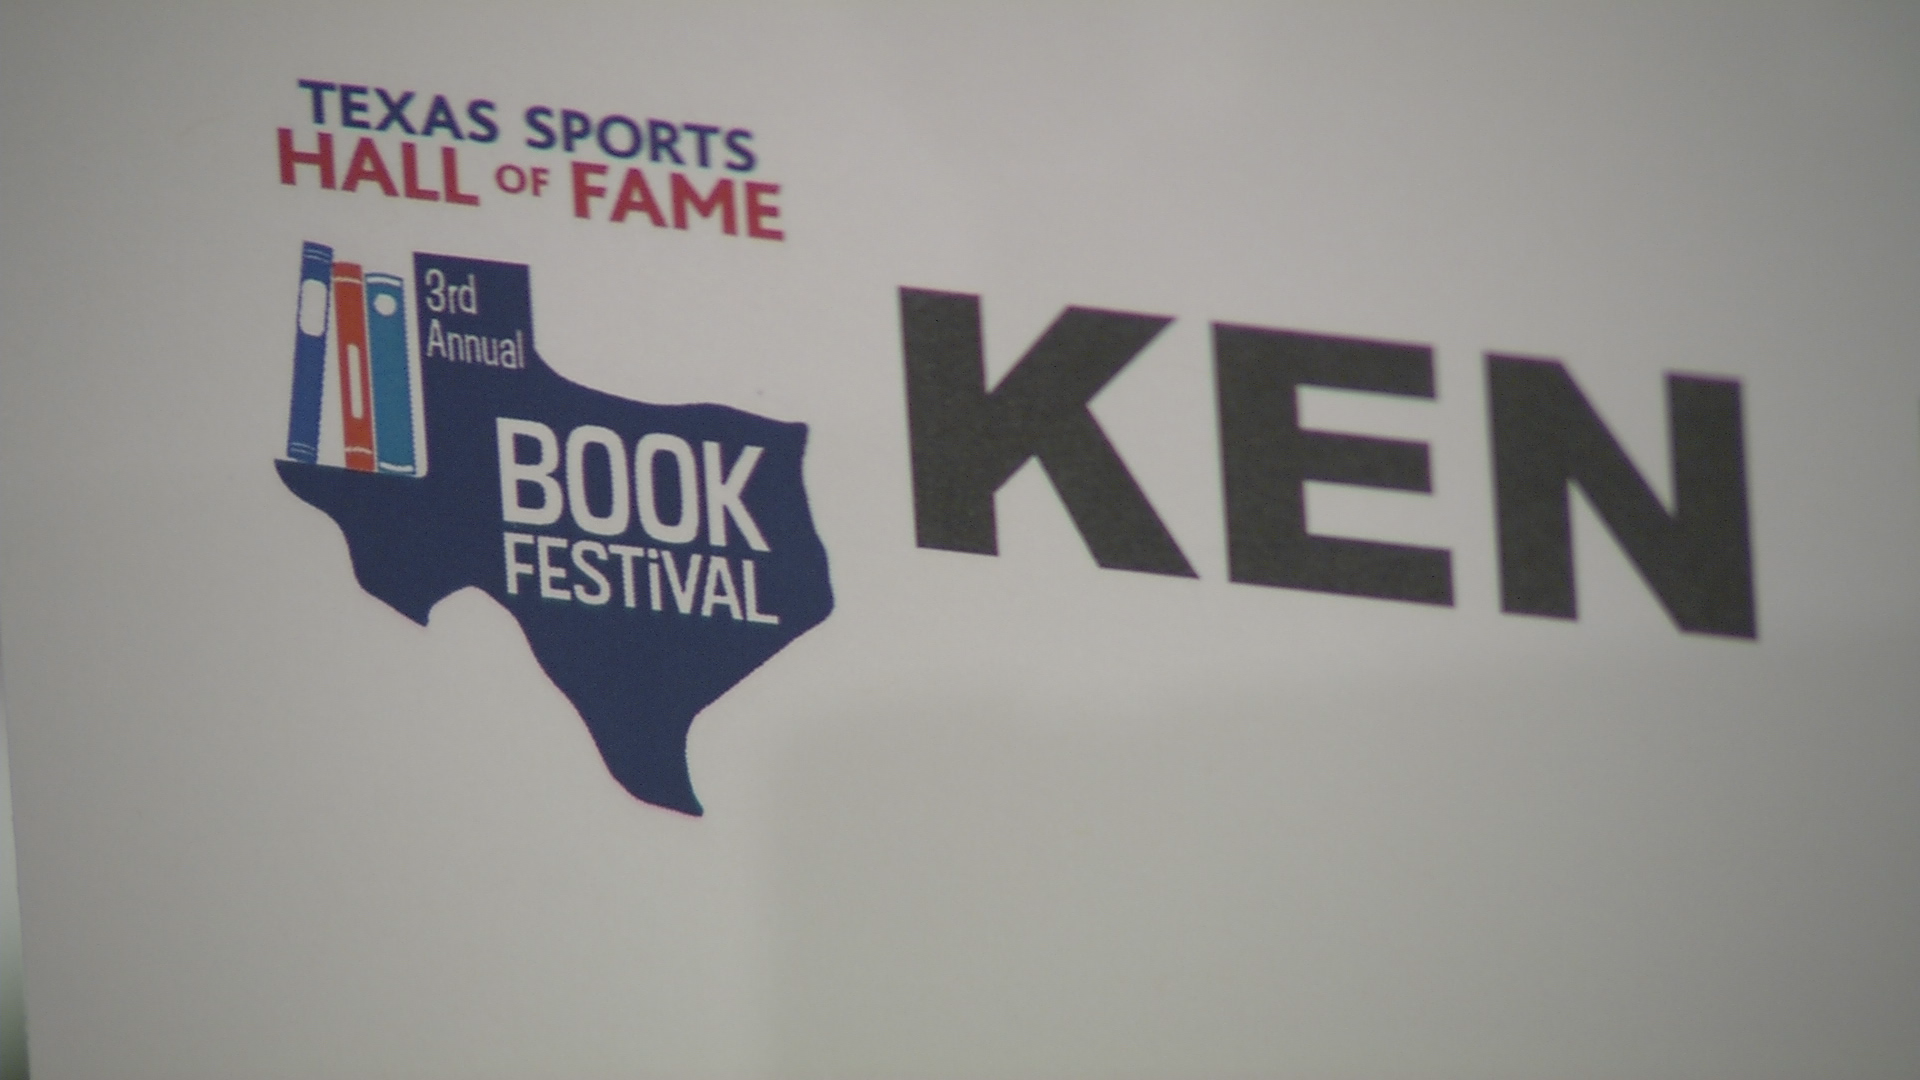 The Texas Sports Hall of Fame held its third annual book festival Saturday.